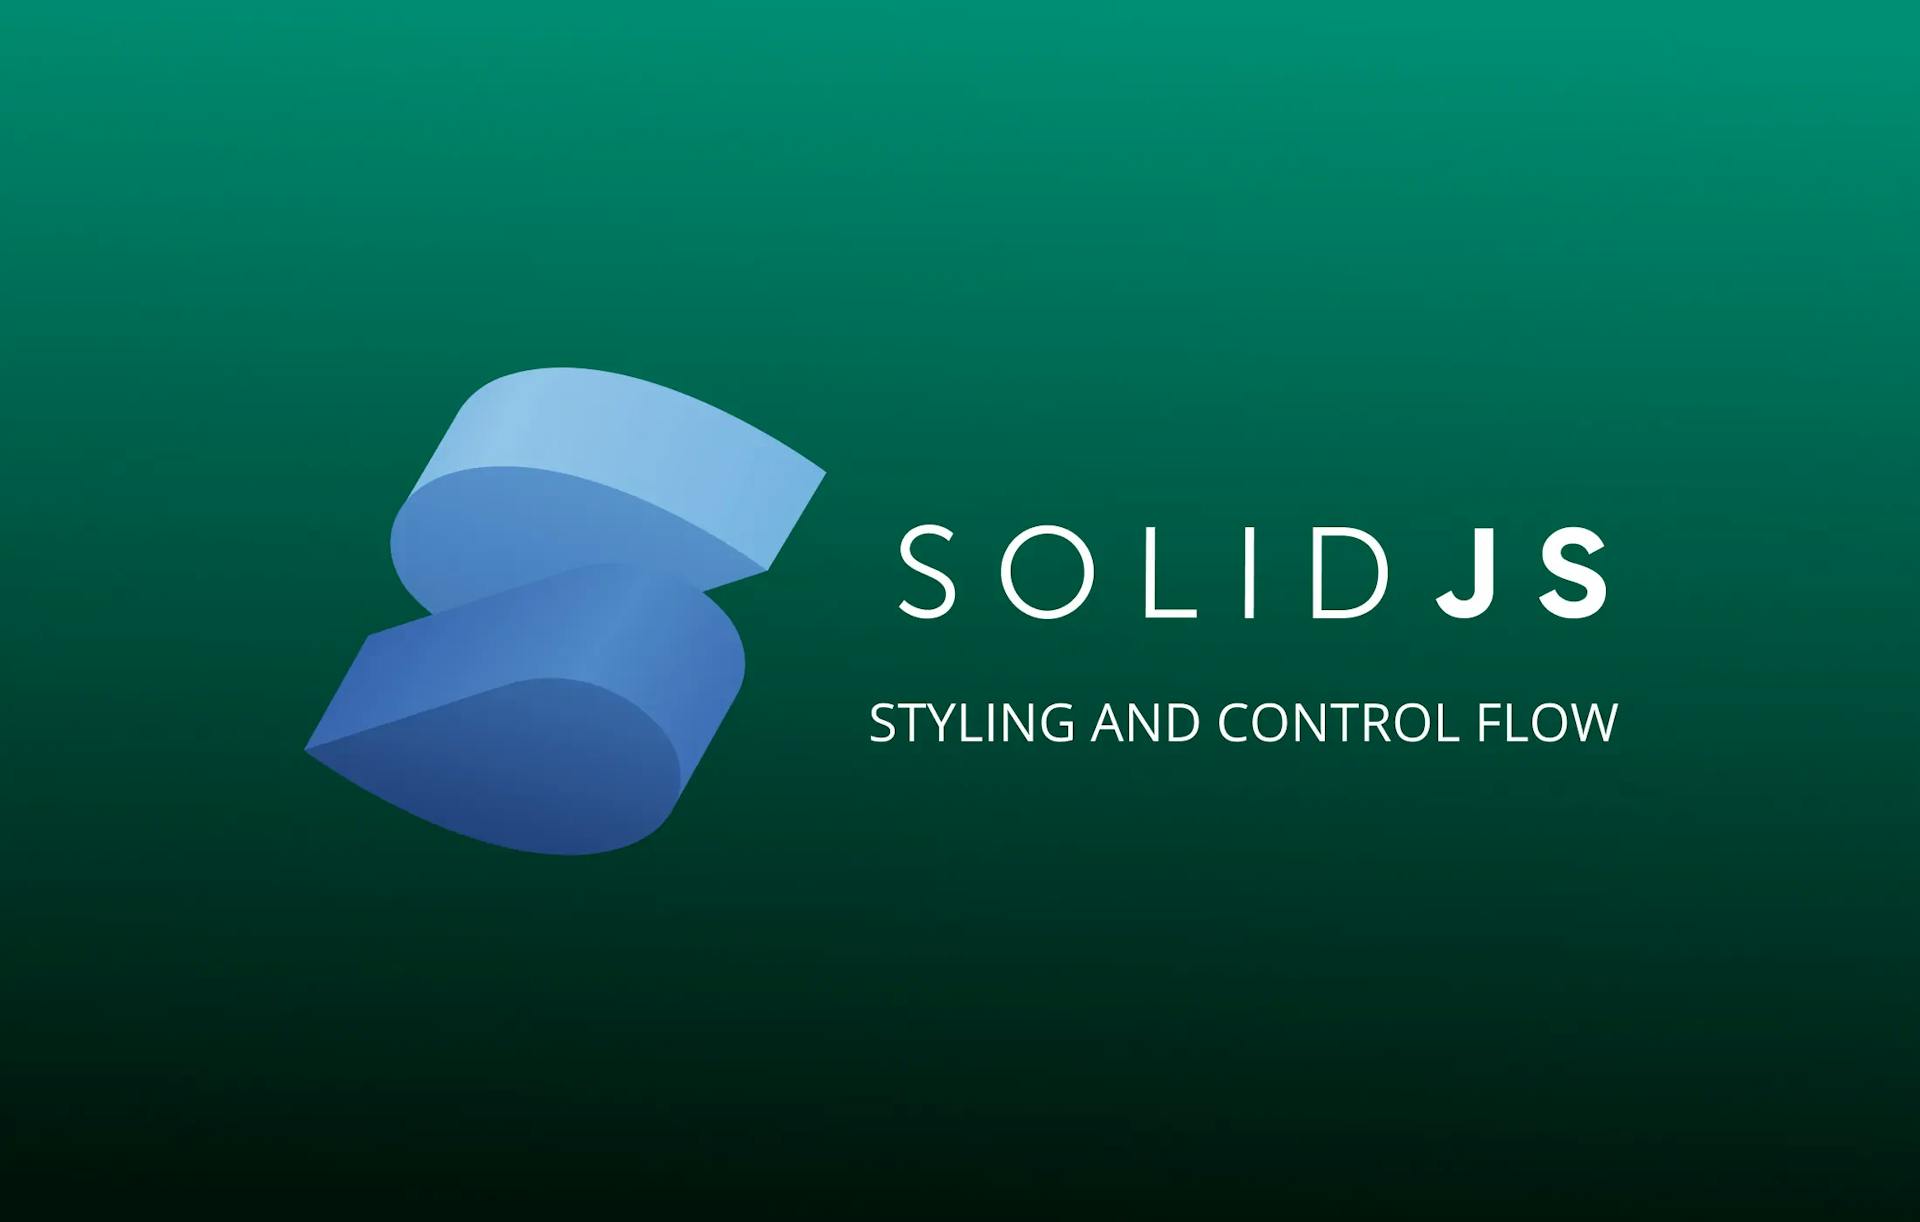 Exploring SolidJS - Styling and Control Flow